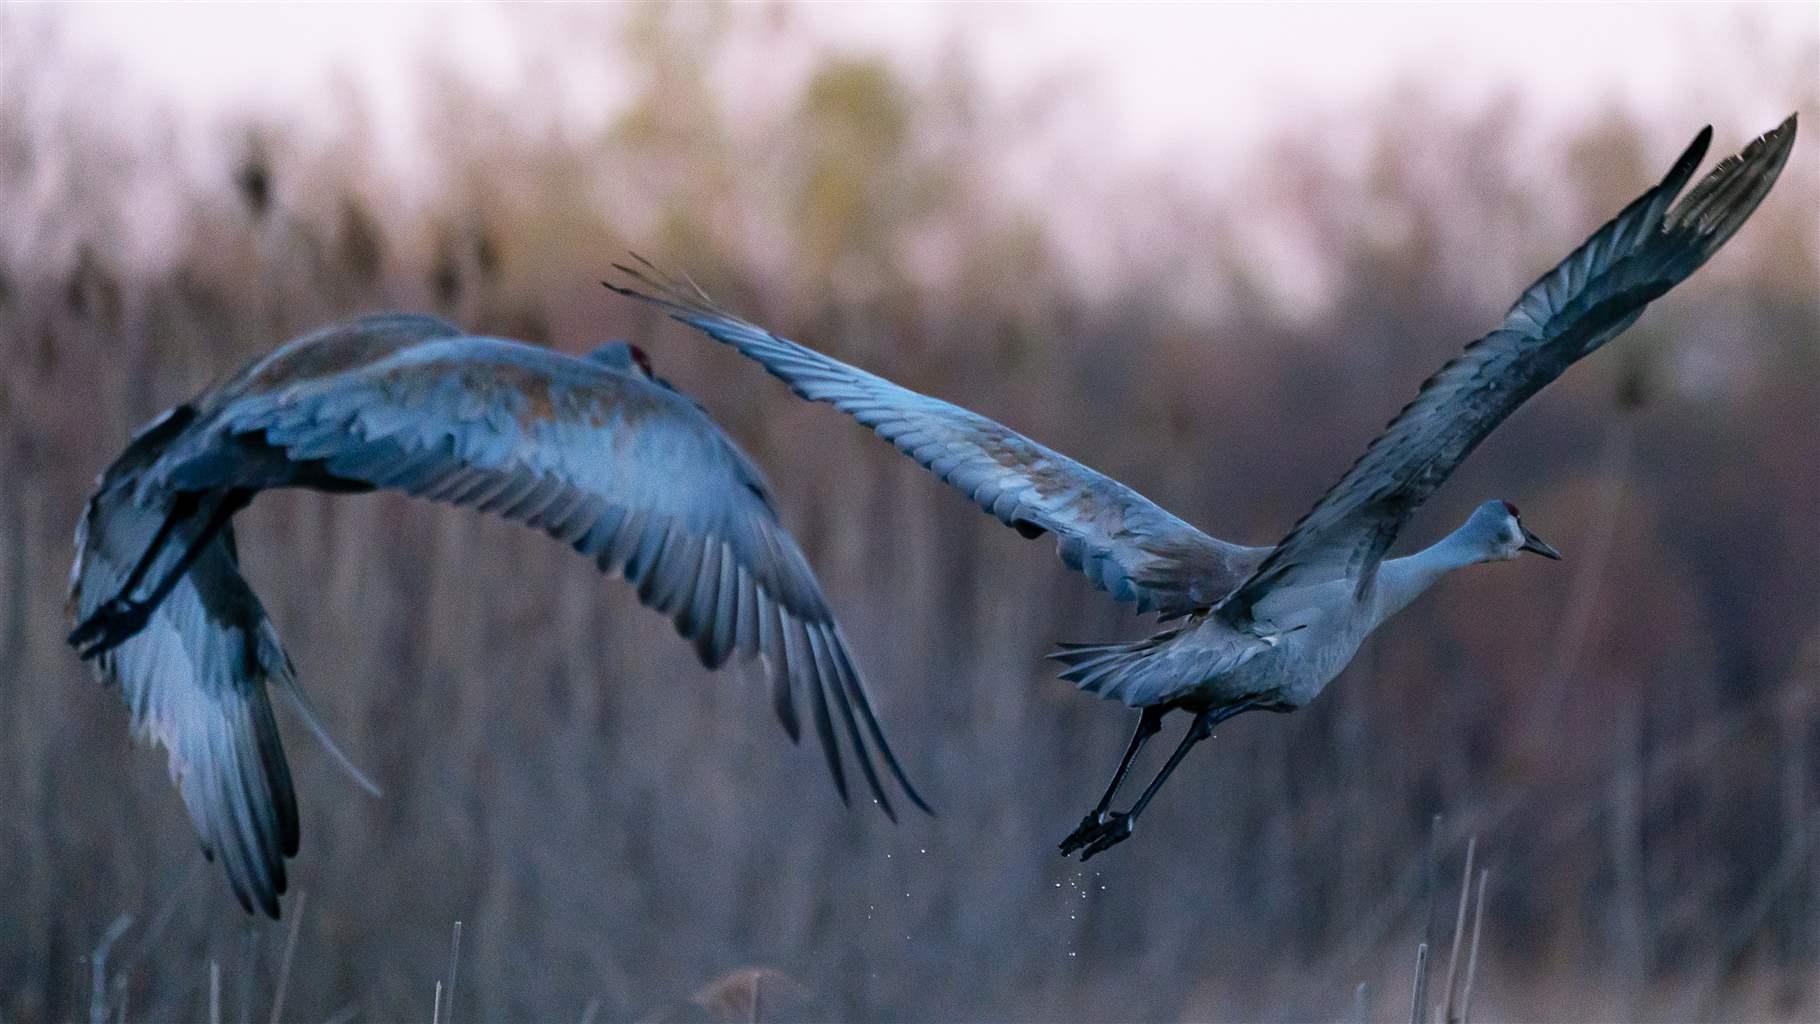 Two large gray and white birds fly over dimly lit wetlands. The birds’ wings are fully extended, showcasing their intricate feathers. The wetlands include tall grasses and reeds. Blurred trees and shrubs are in the background. The muted lighting suggests dawn or dusk. 